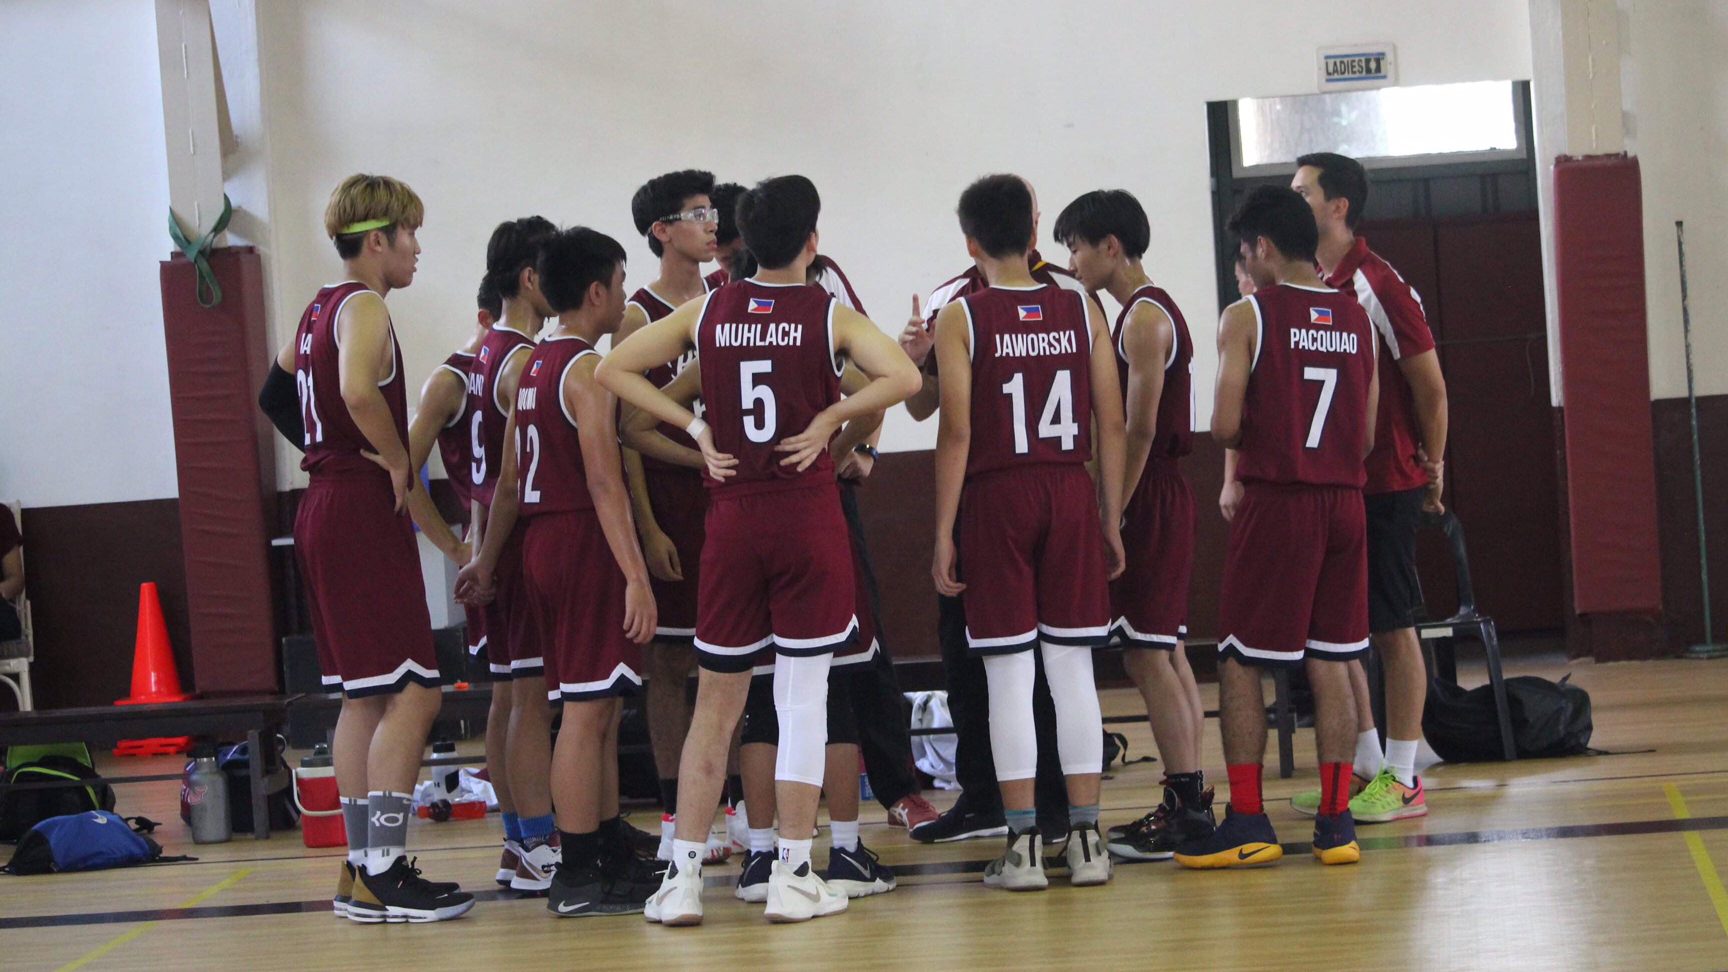 Pacquiao son suits up for Brent Manila in ISAC boys basketball